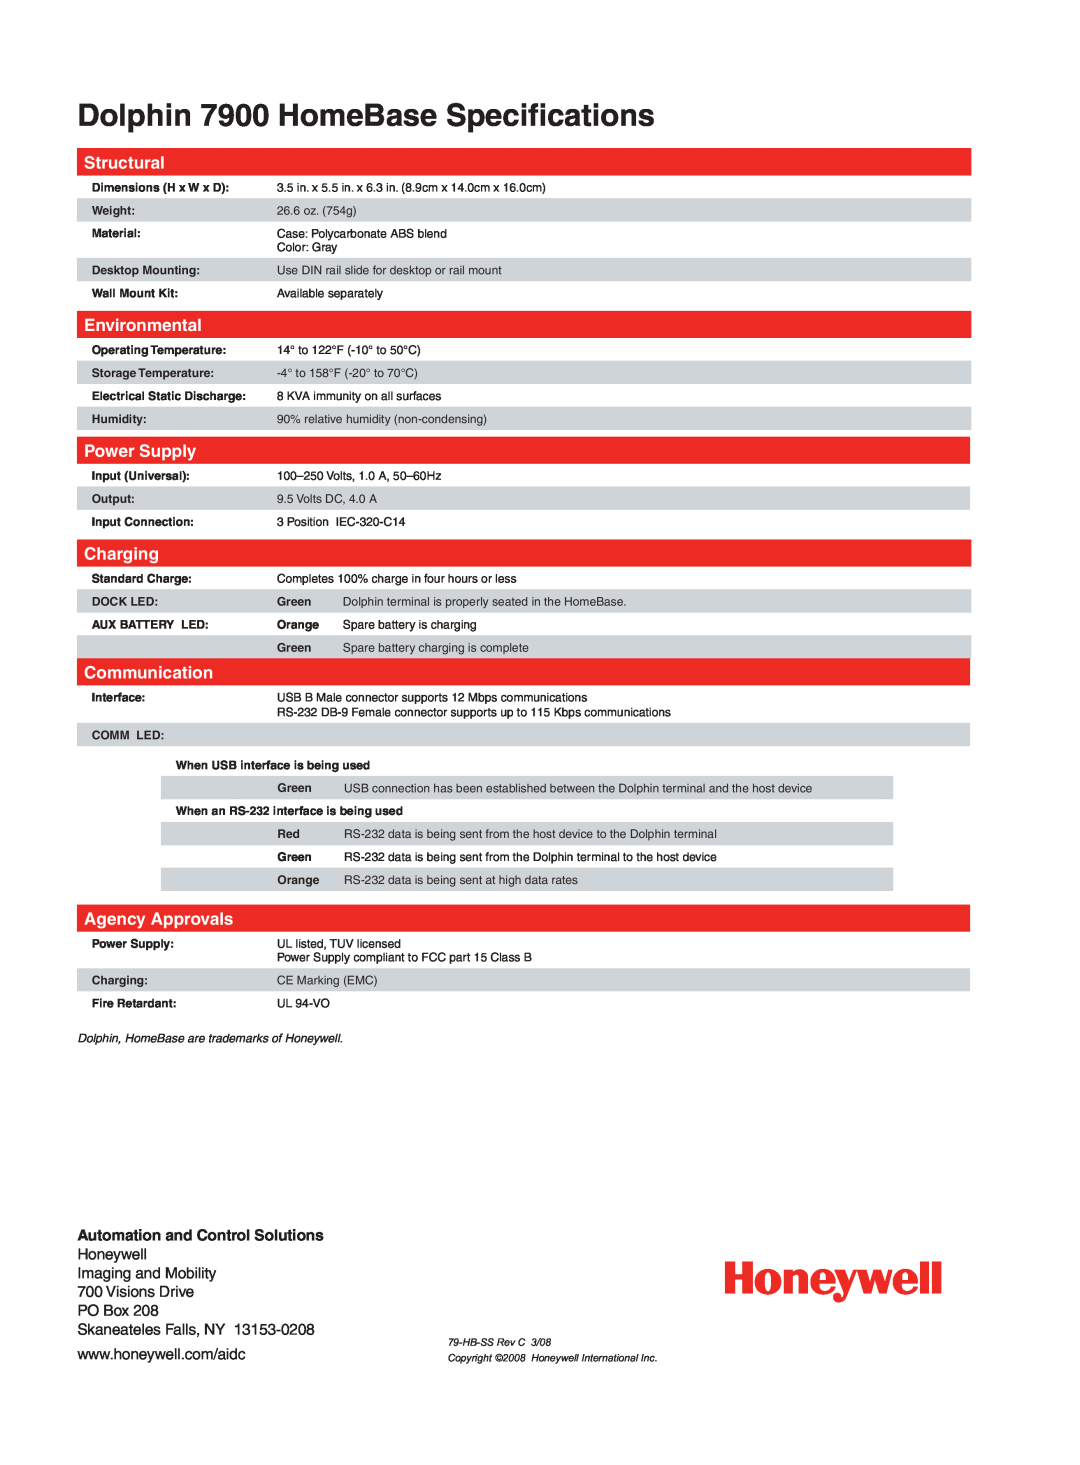 Honeywell D7900 Automation and Control Solutions, Dolphin 7900 HomeBase Speciﬁcations, Structural, Environmental, Charging 